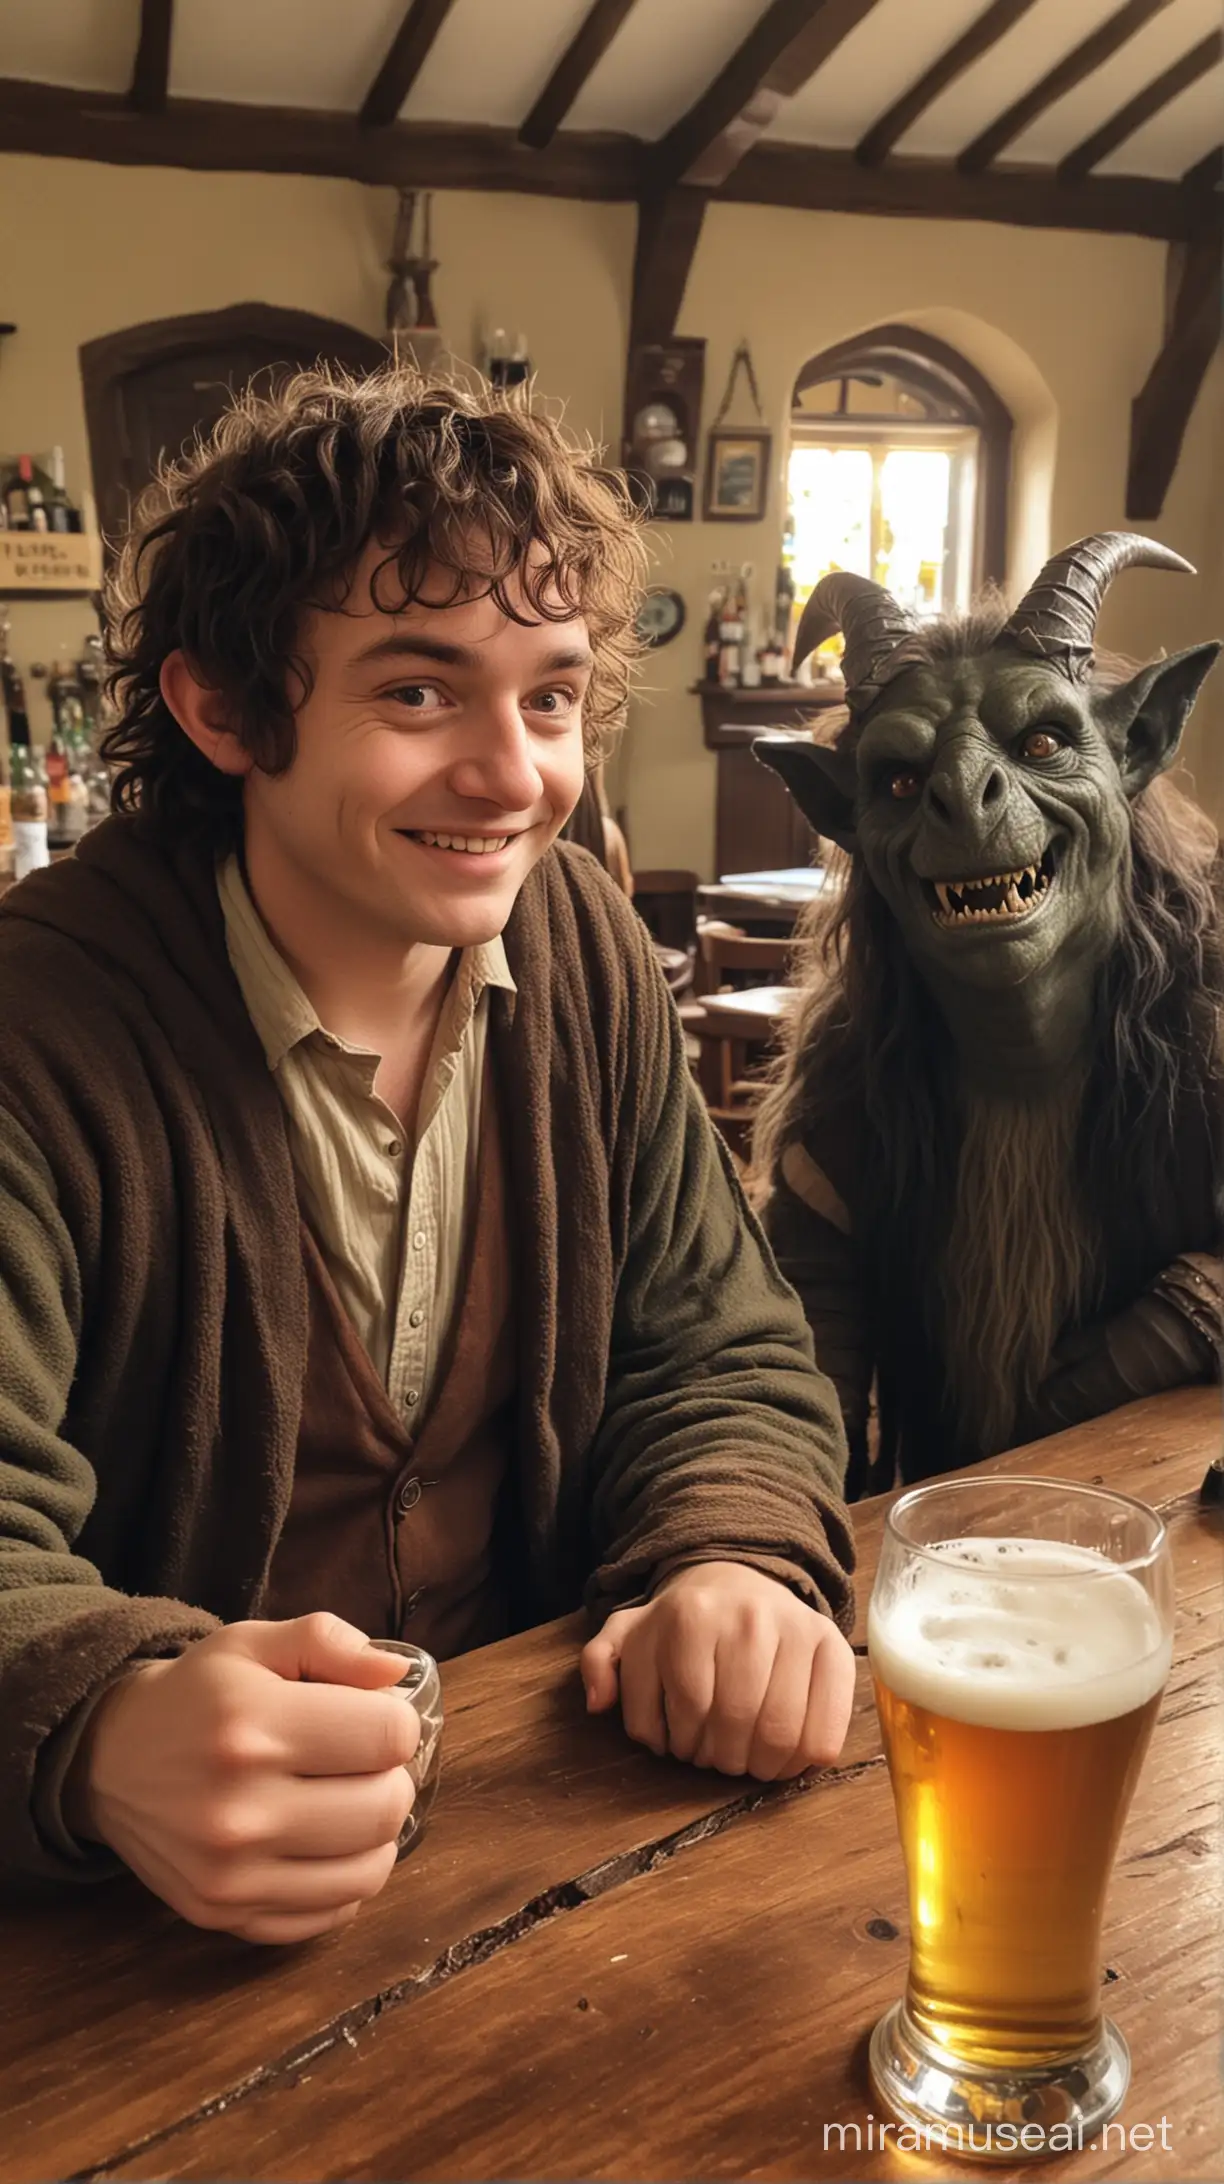 Frodo and Sauron Enjoying Friendship and Beer at the Shire Pub